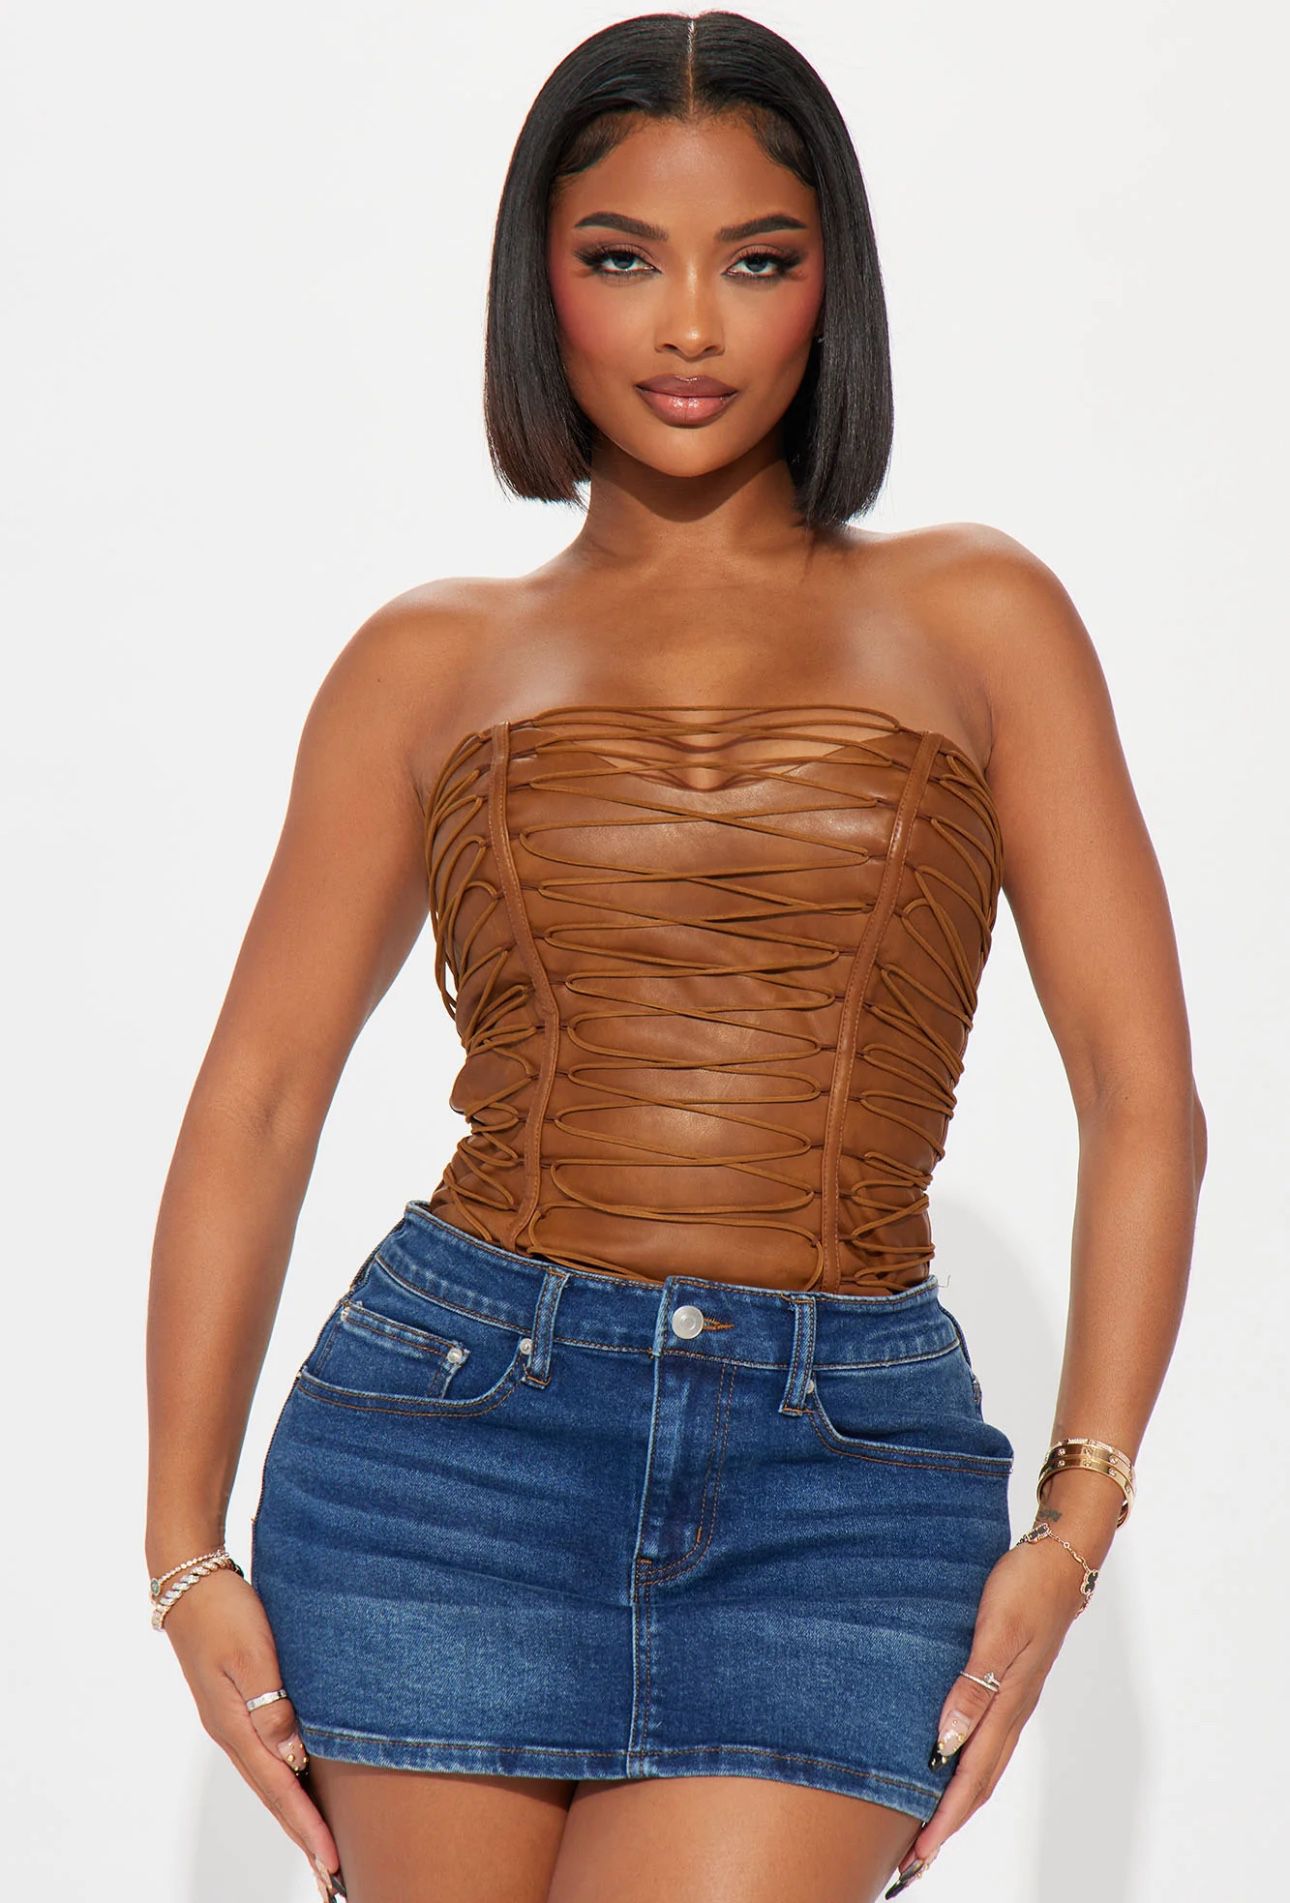 Brown Lace Up Corset Top Size Small 